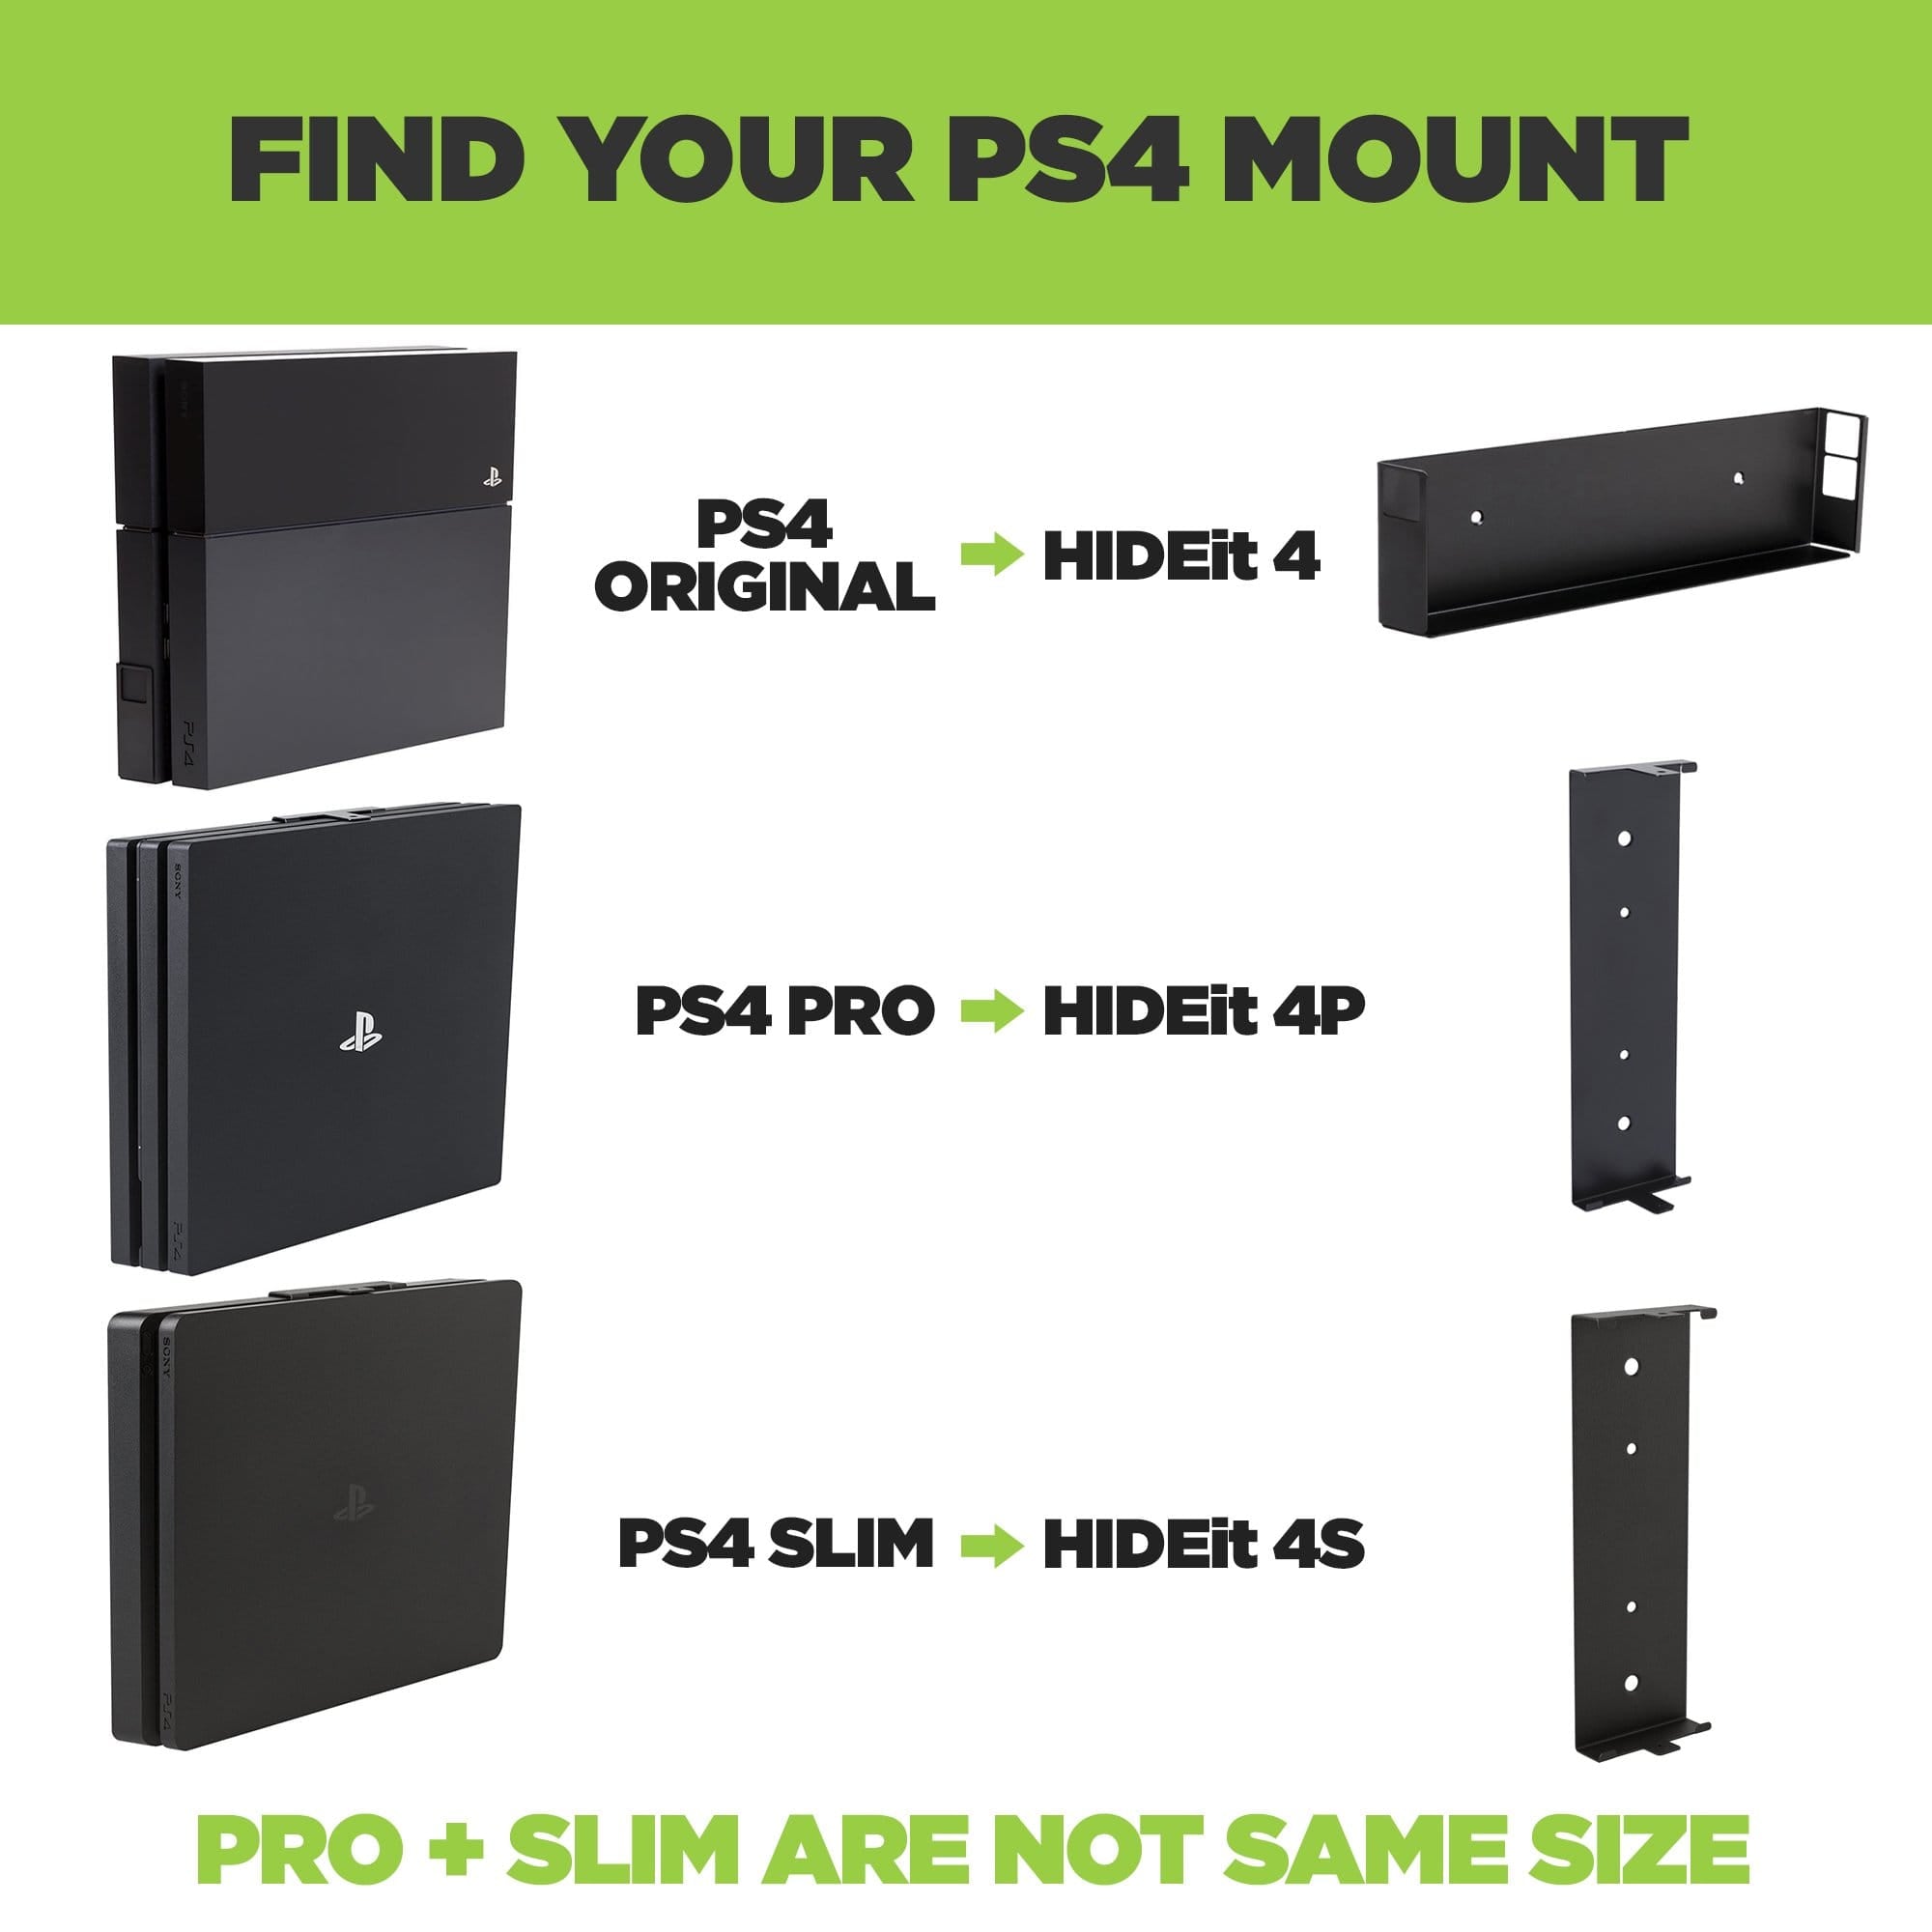 mounting ps4 on wall